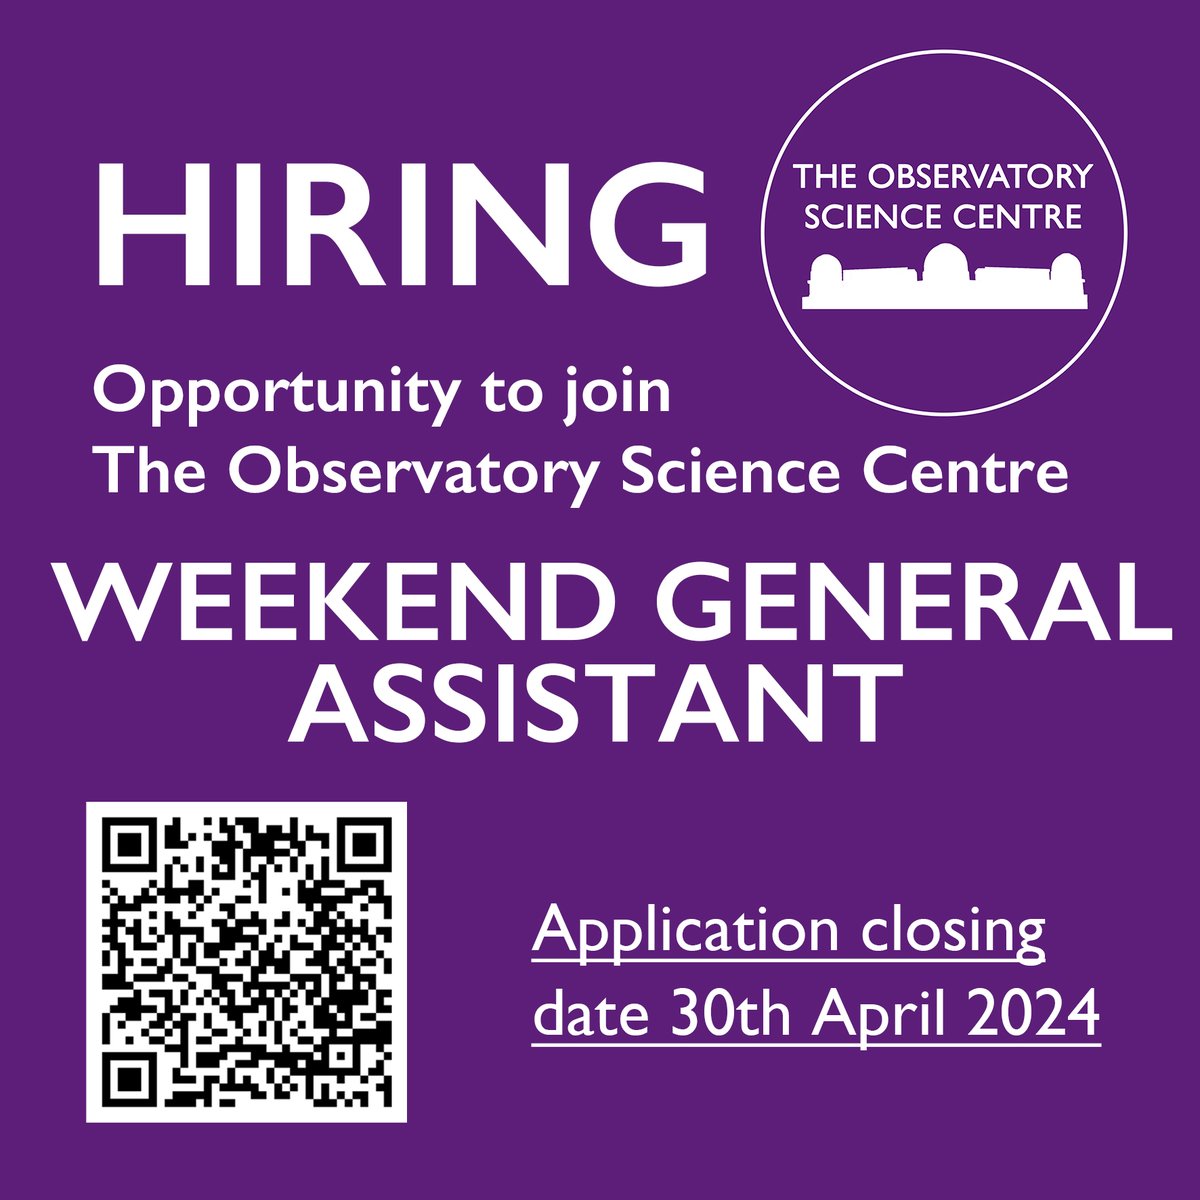 Hello... opportunity to act as an ambassador for The Observatory Science Centre, promoting science and astronomy to our visitors bit.ly/3Uuhkzu #CareerOpportunities #jobsearch #weekendwork #vacancy